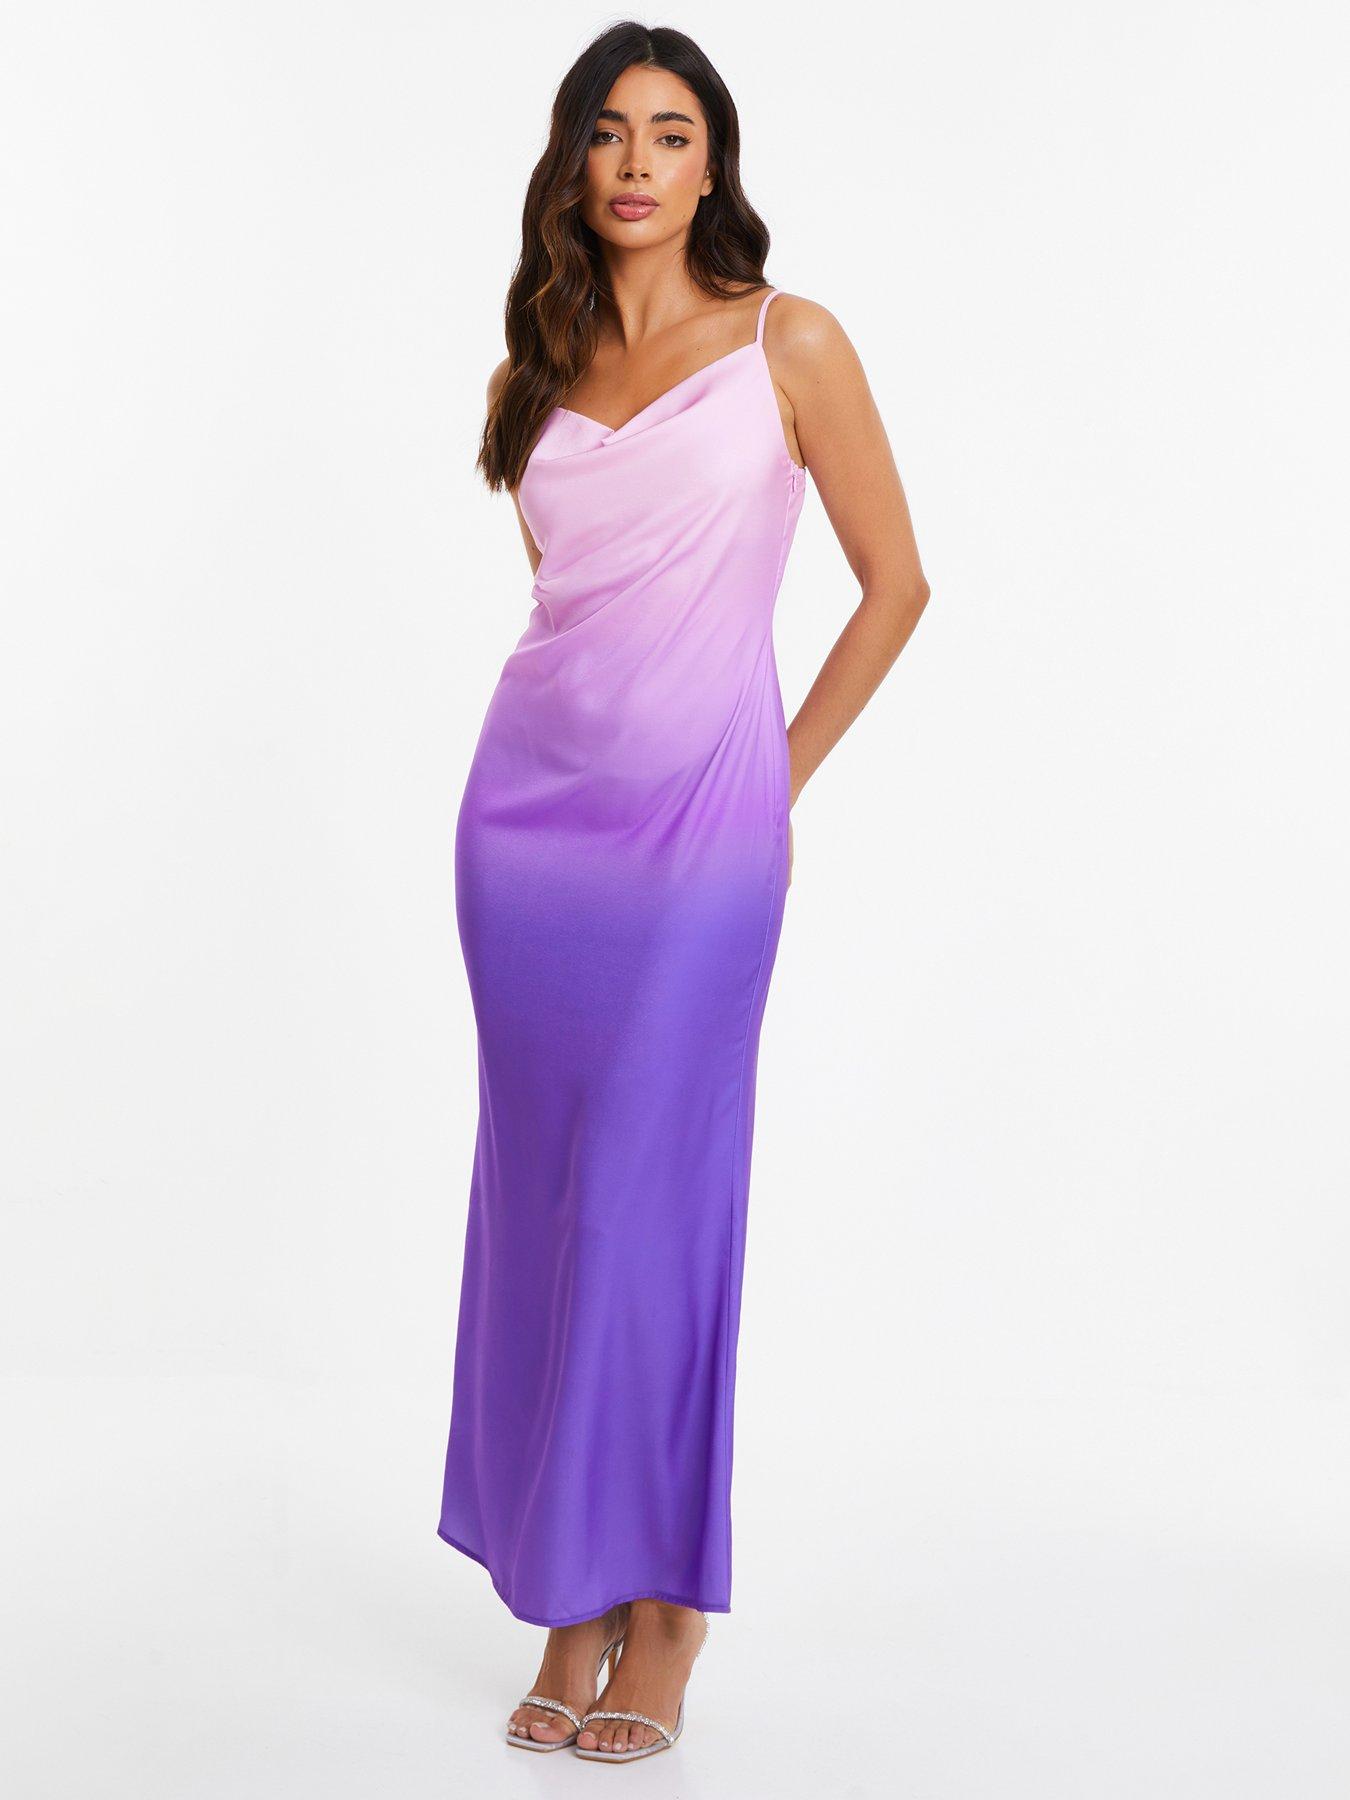 The New Wave Of Slip Dresses Celebrities LOVE | Evening dresses, Glamorous  outfits, Long maxi gowns